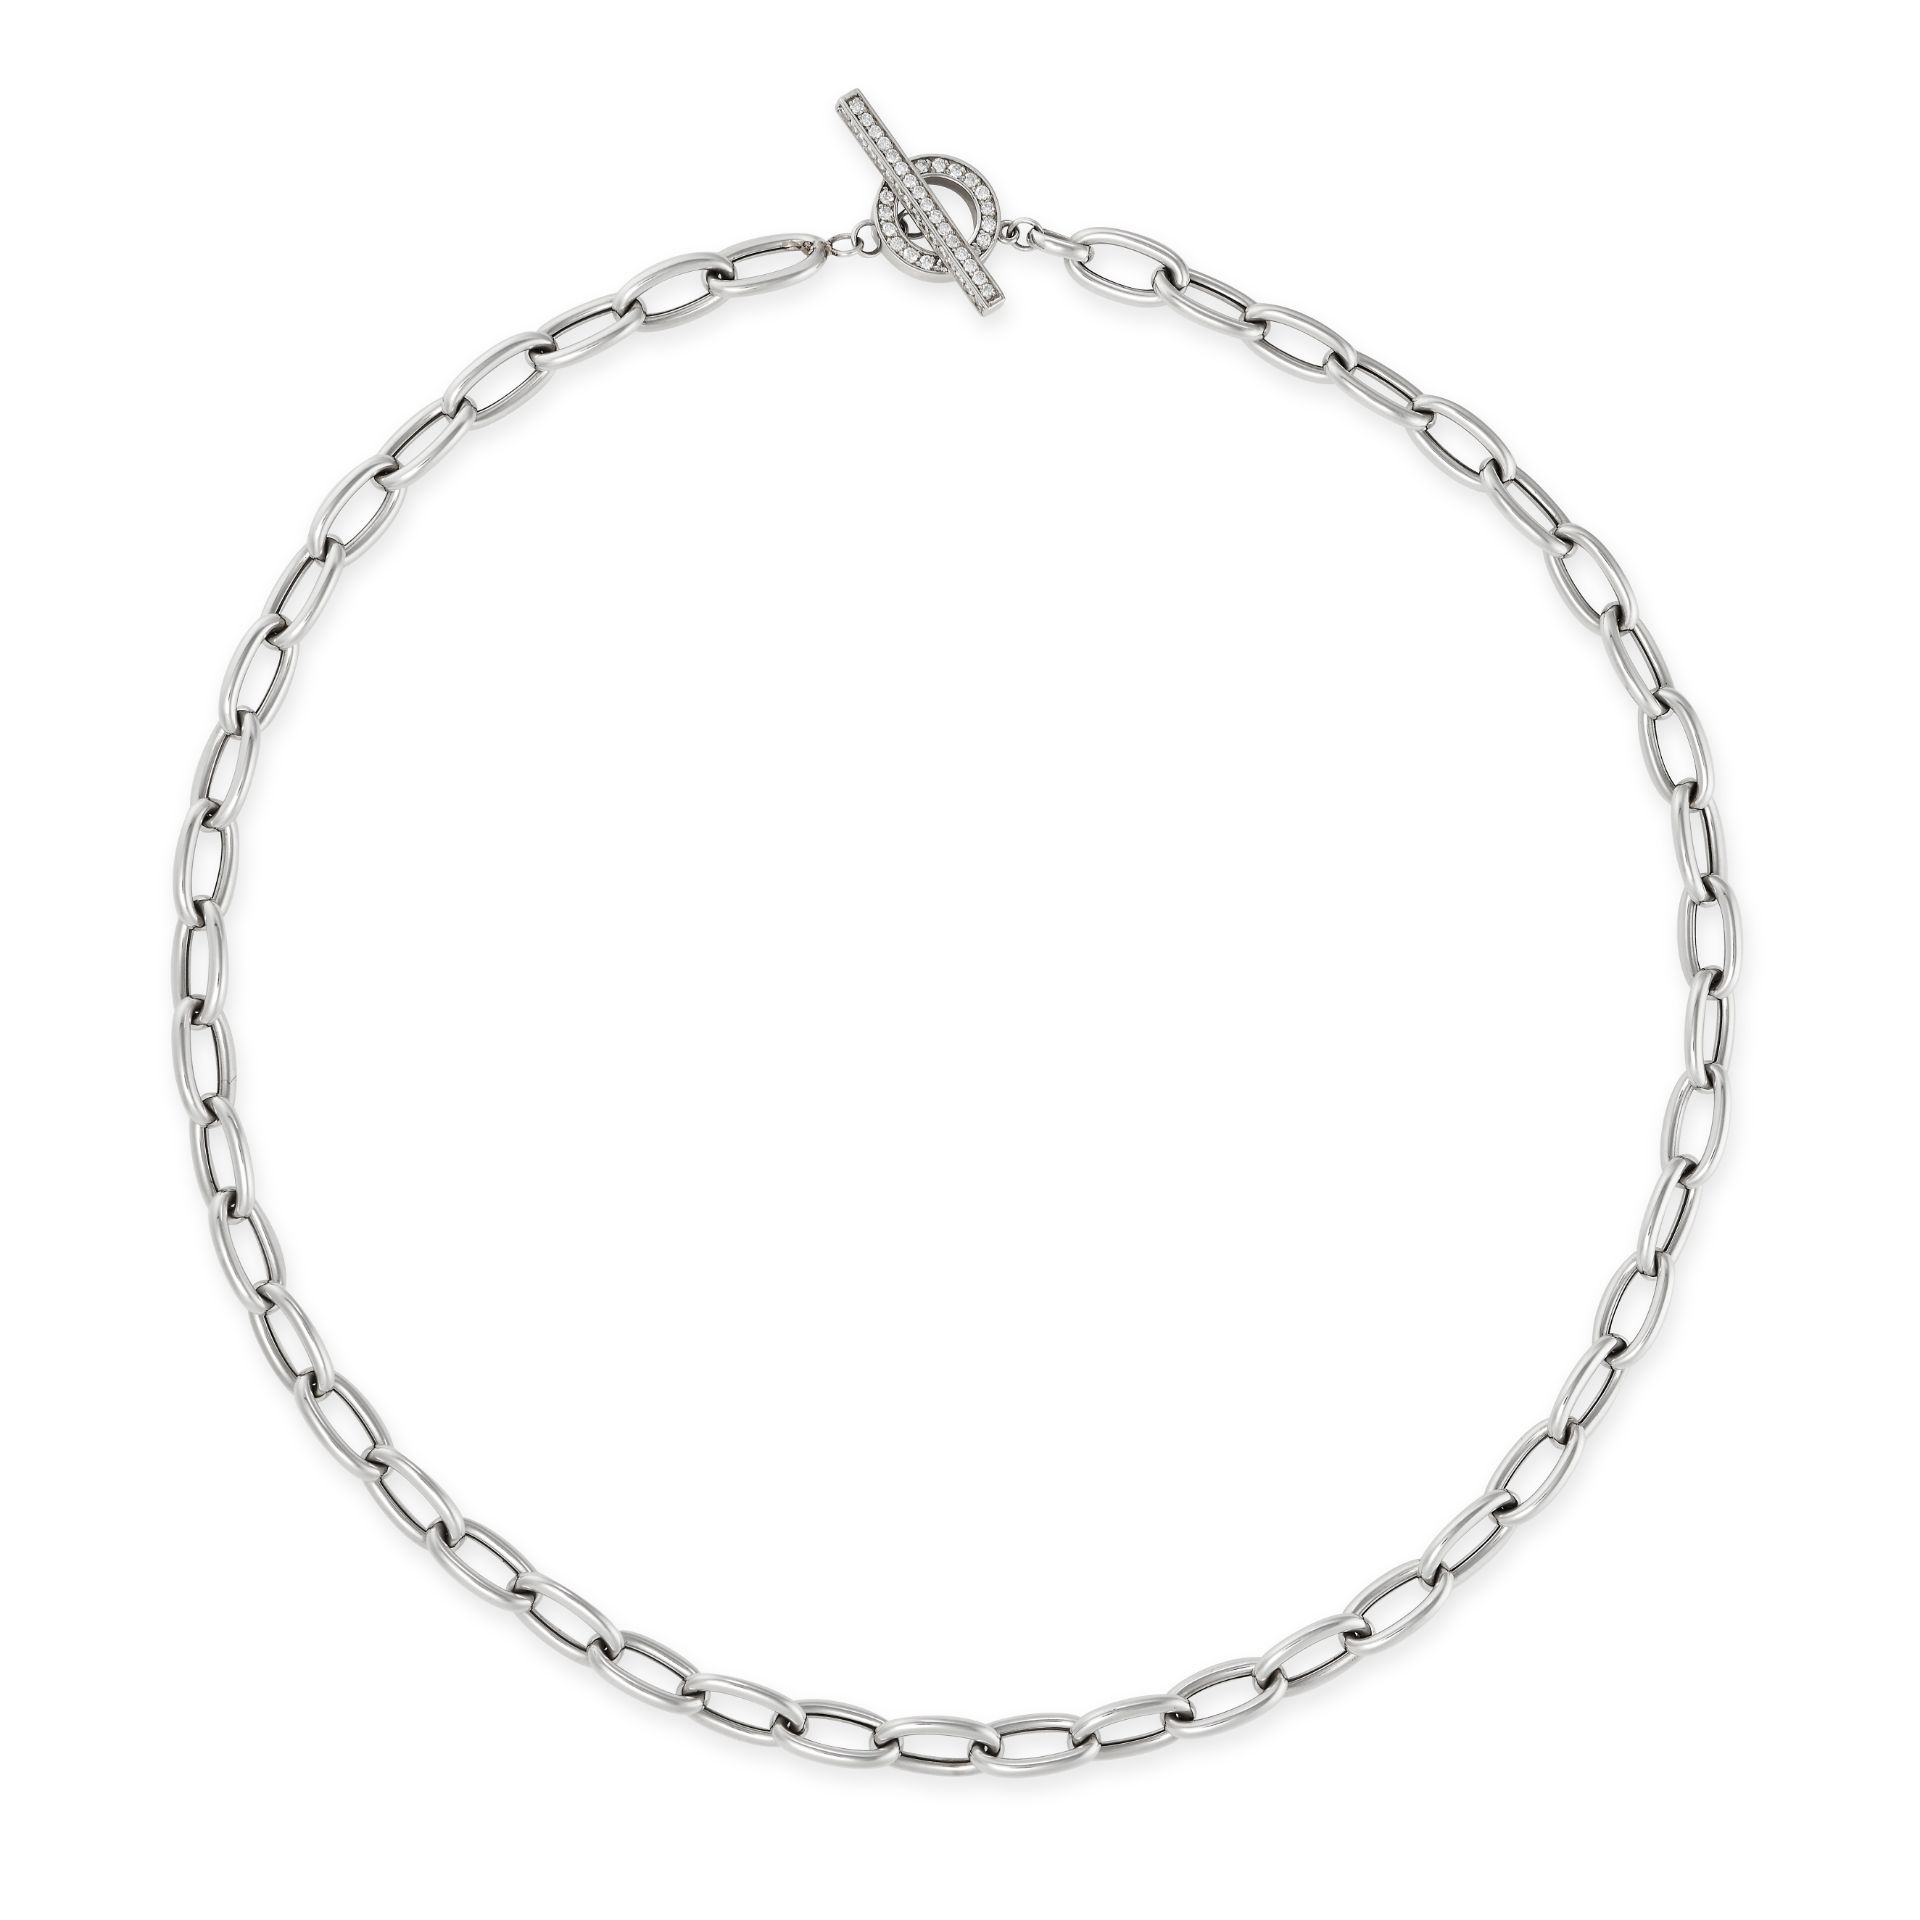 A DIAMOND FANCY LINK CHAIN NECKLACE in white gold, comprising a row of interlocking oval links, t...